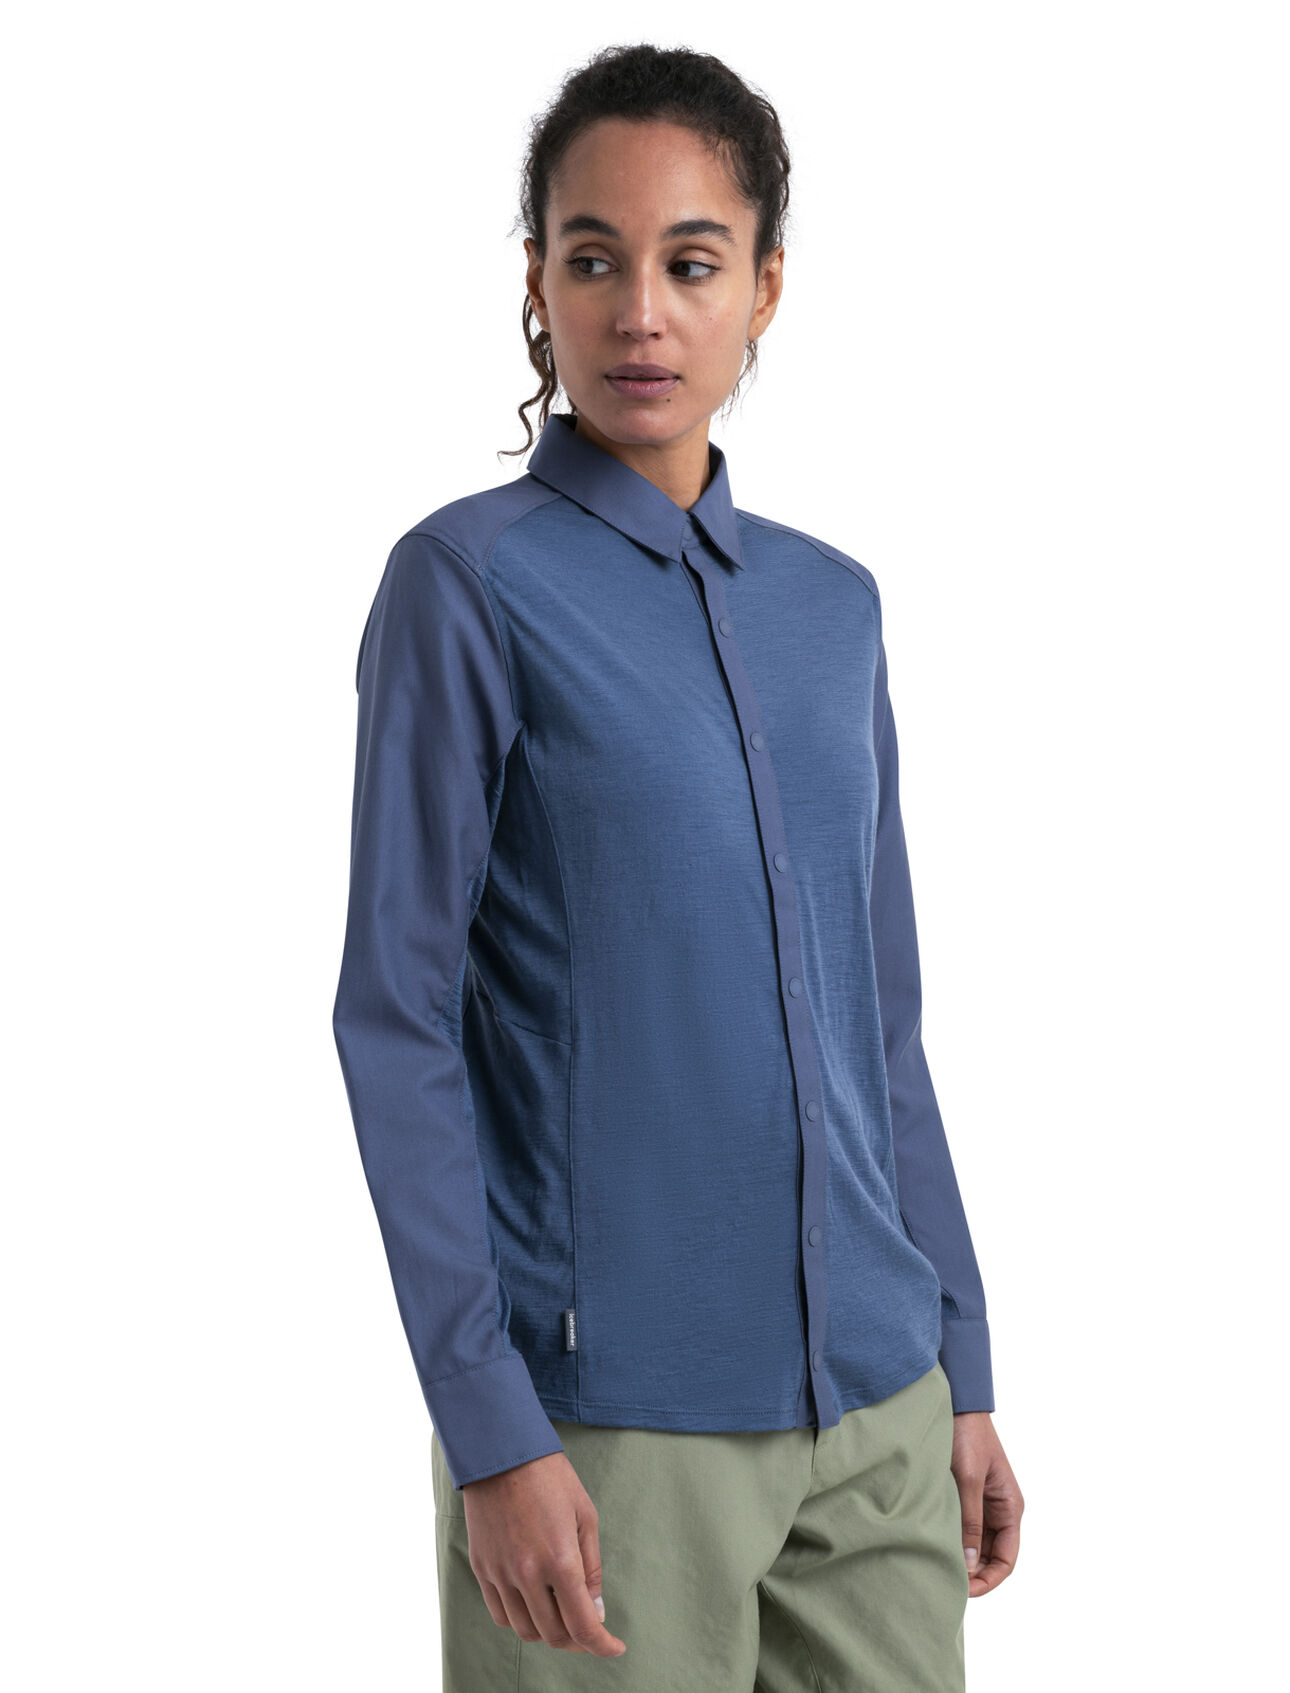 Womens Merino Hike Long Sleeve Top A lightweight and breathable merino shirt ideal for mountain adventures, the Hike Long Sleeve Top also provides the casual style for whatever comes after.